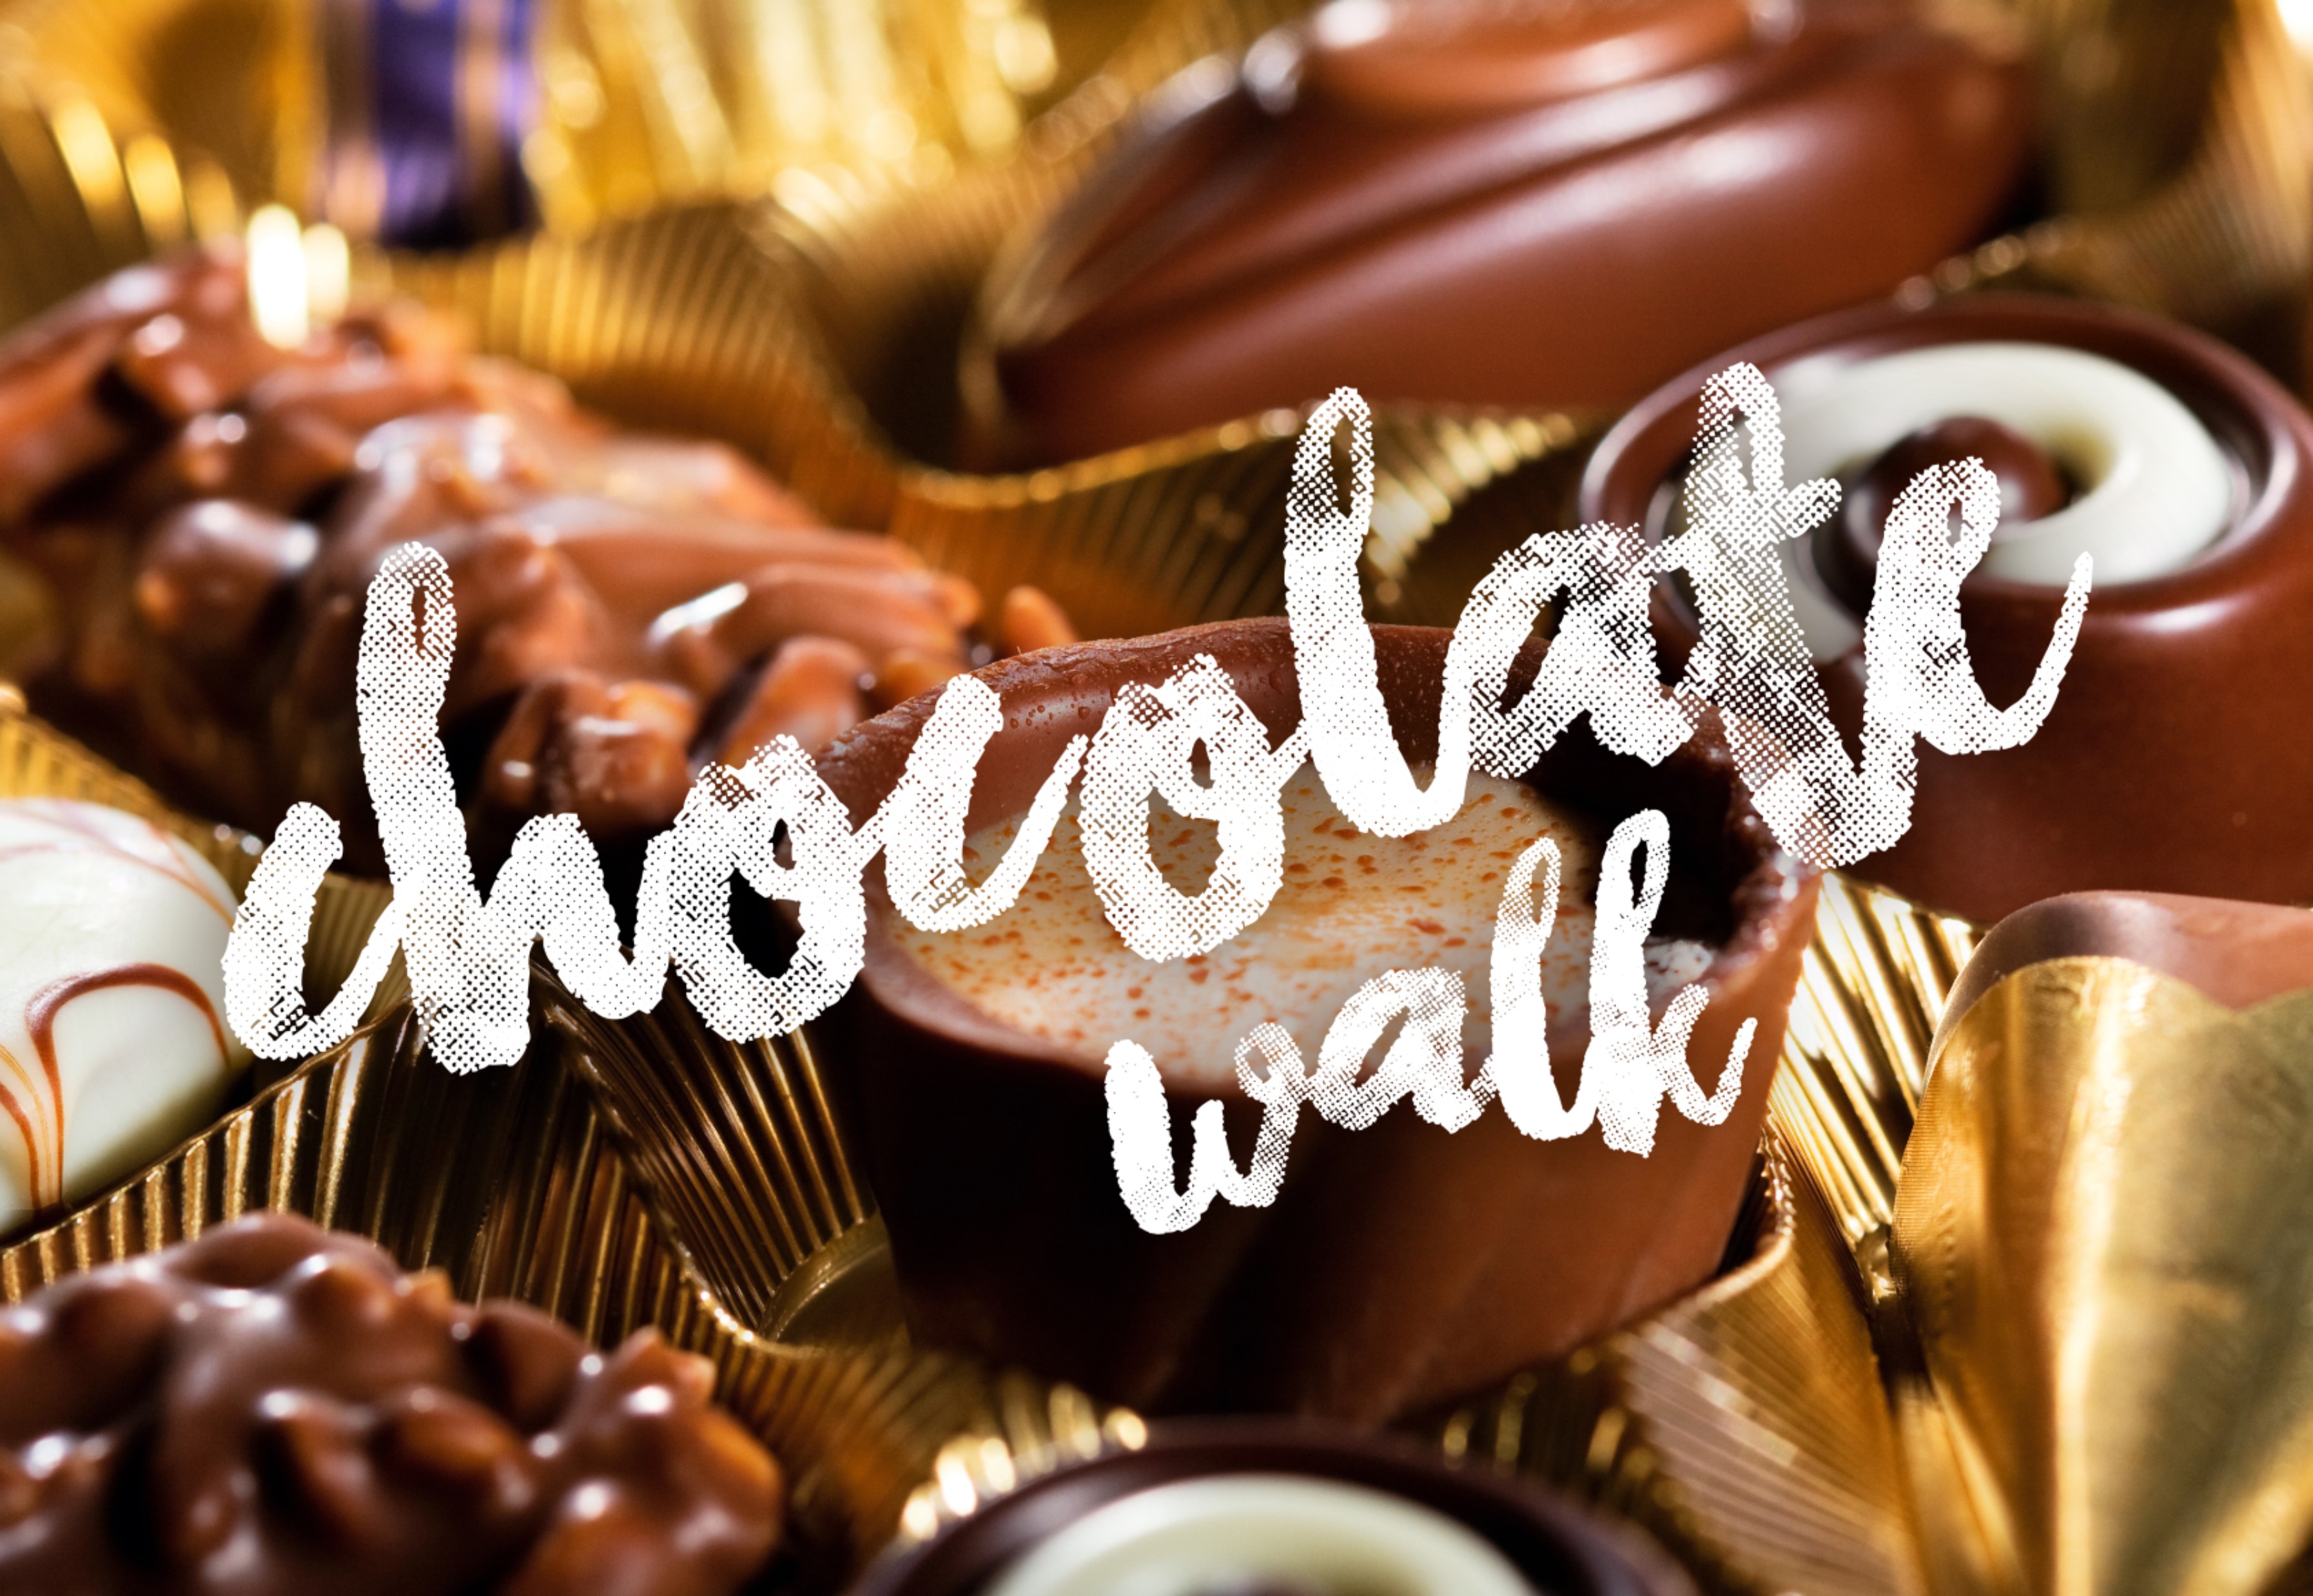 We are a stop on the Chocolate Walk!